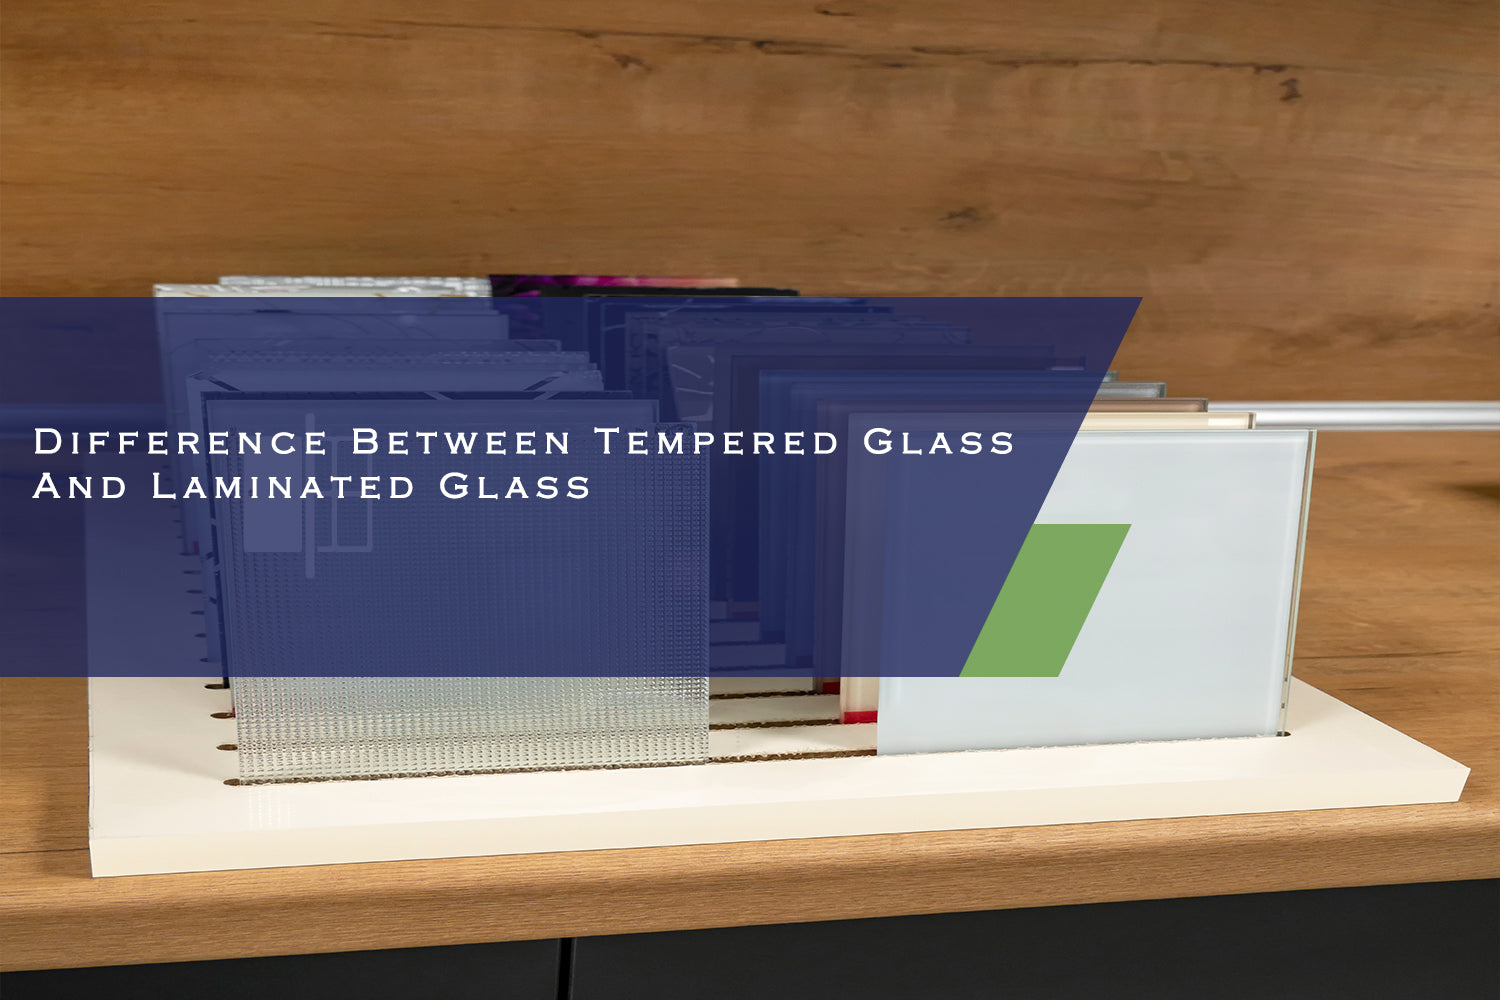 Difference Between Tempered Glass And Laminated Glass